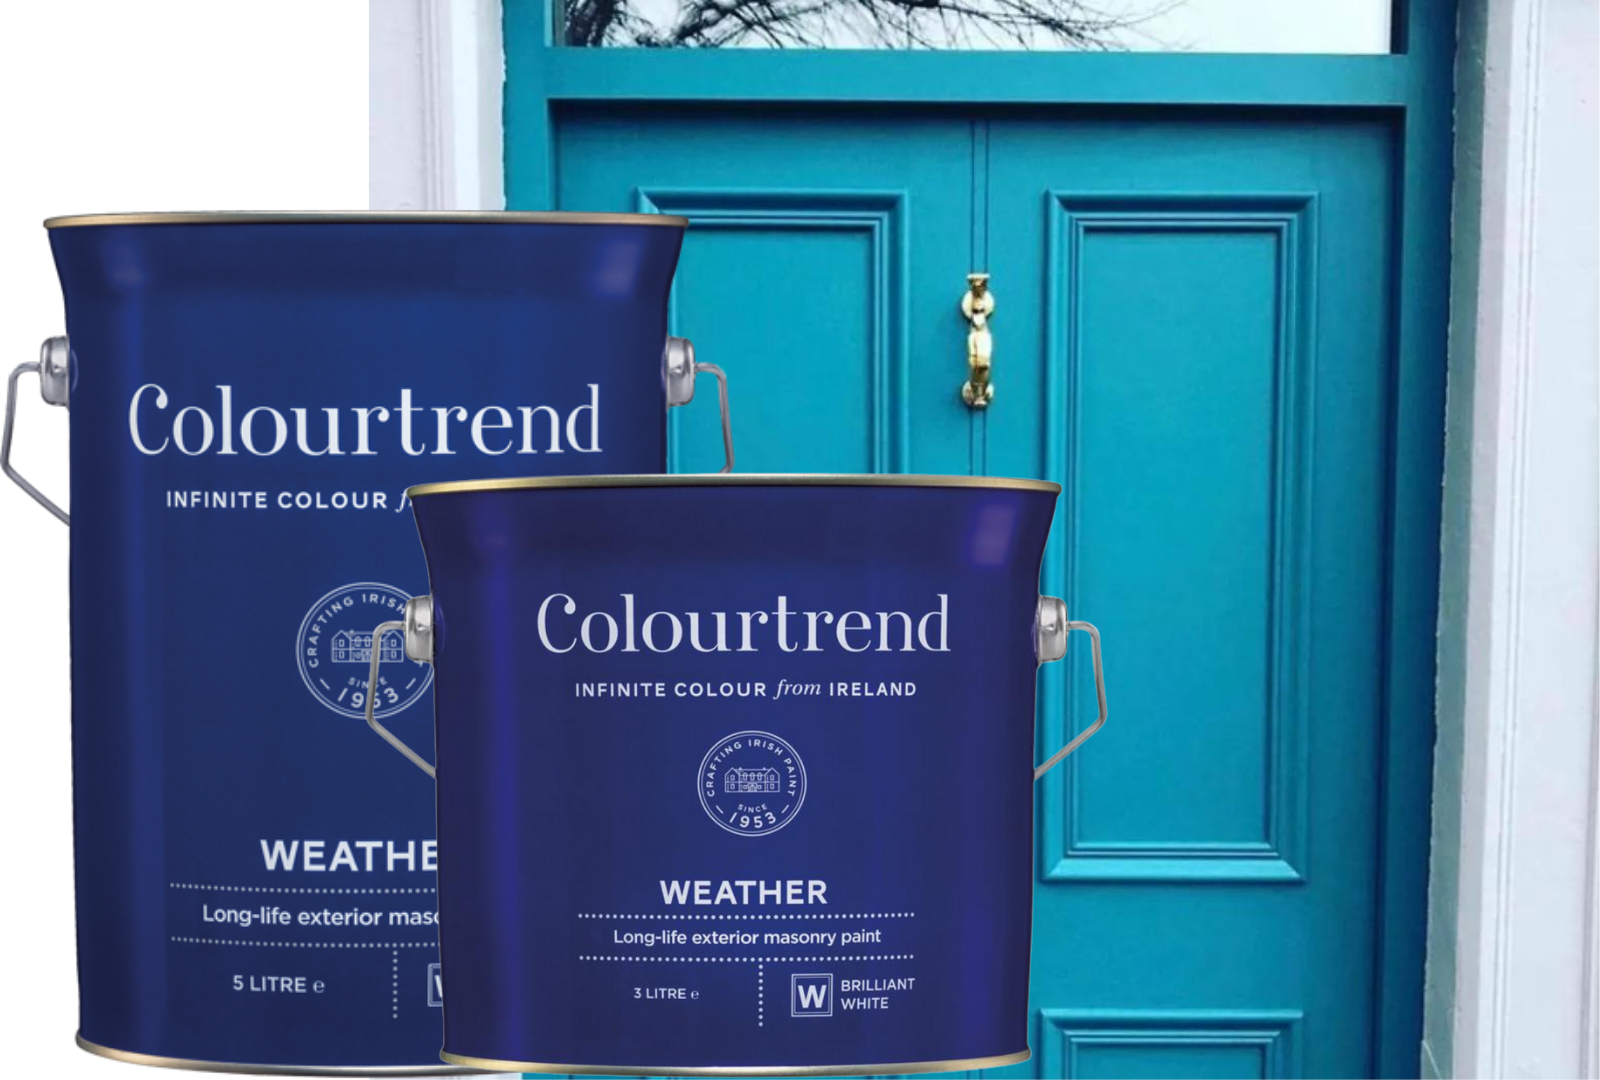 Colourtrend Petrol | Same Day Dublin and Nationwide Paint in Ireland Delivery by Weirs of Baggot Street - Official Colourtrend Stockist